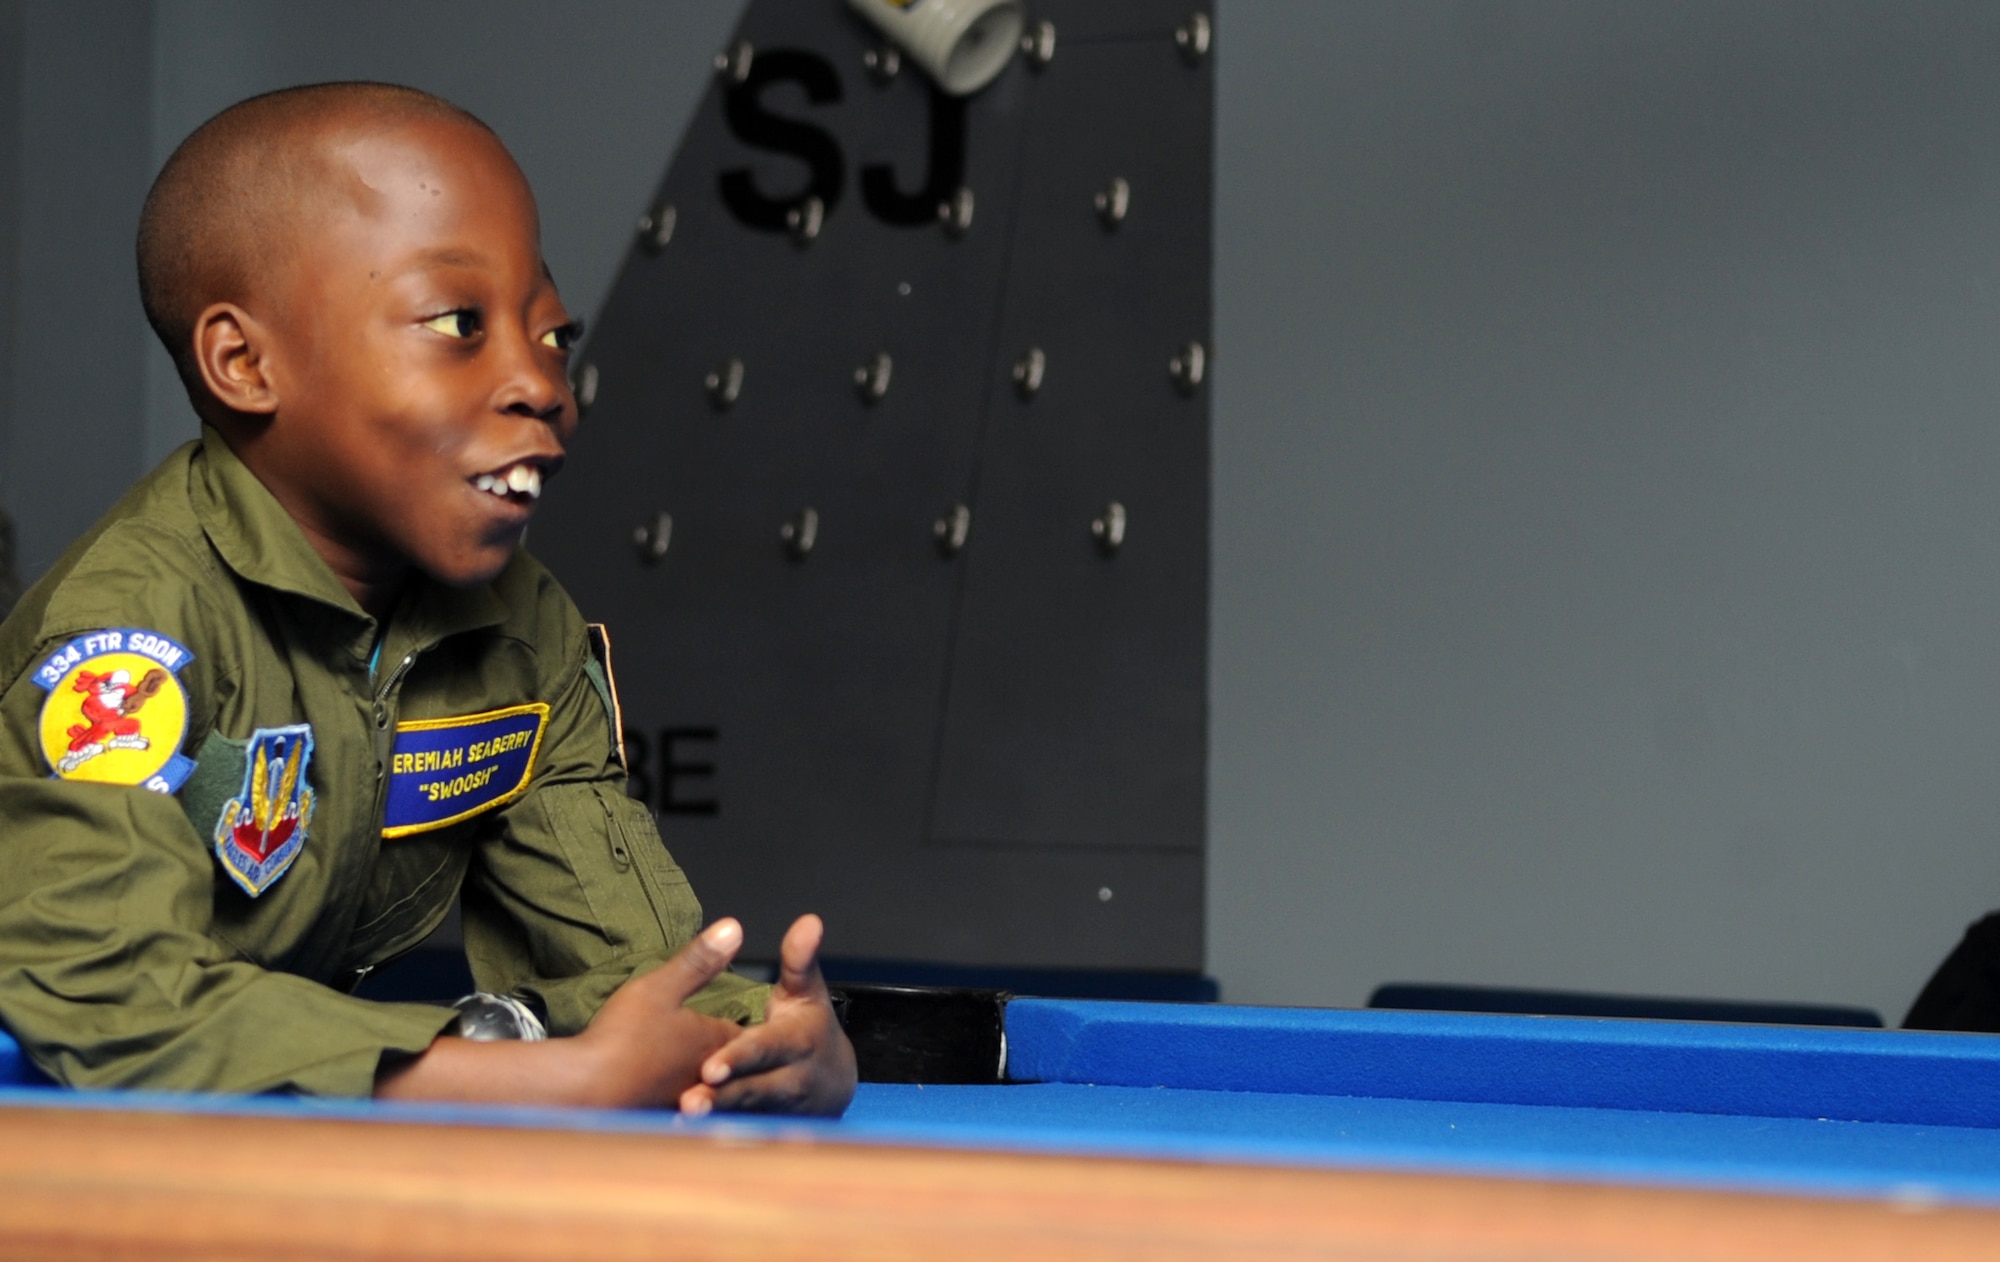 Jeremiah Seaberry, 334th FS pilot for a day, learns how to play crud from Capt. Adam Luber, 334th Fighter Squadron instructor pilot, during a 4th Fighter Wing Pilot for a Day event, April 3, 2015, at Seymour Johnson Air Force Base, North Carolina. Crud is a mix between pool and football, and was one of the many fighter pilot traditions Jeremiah  learned about during his visit to the base. (U.S. Air Force photo/Senior Airman Ashley J. Thum)